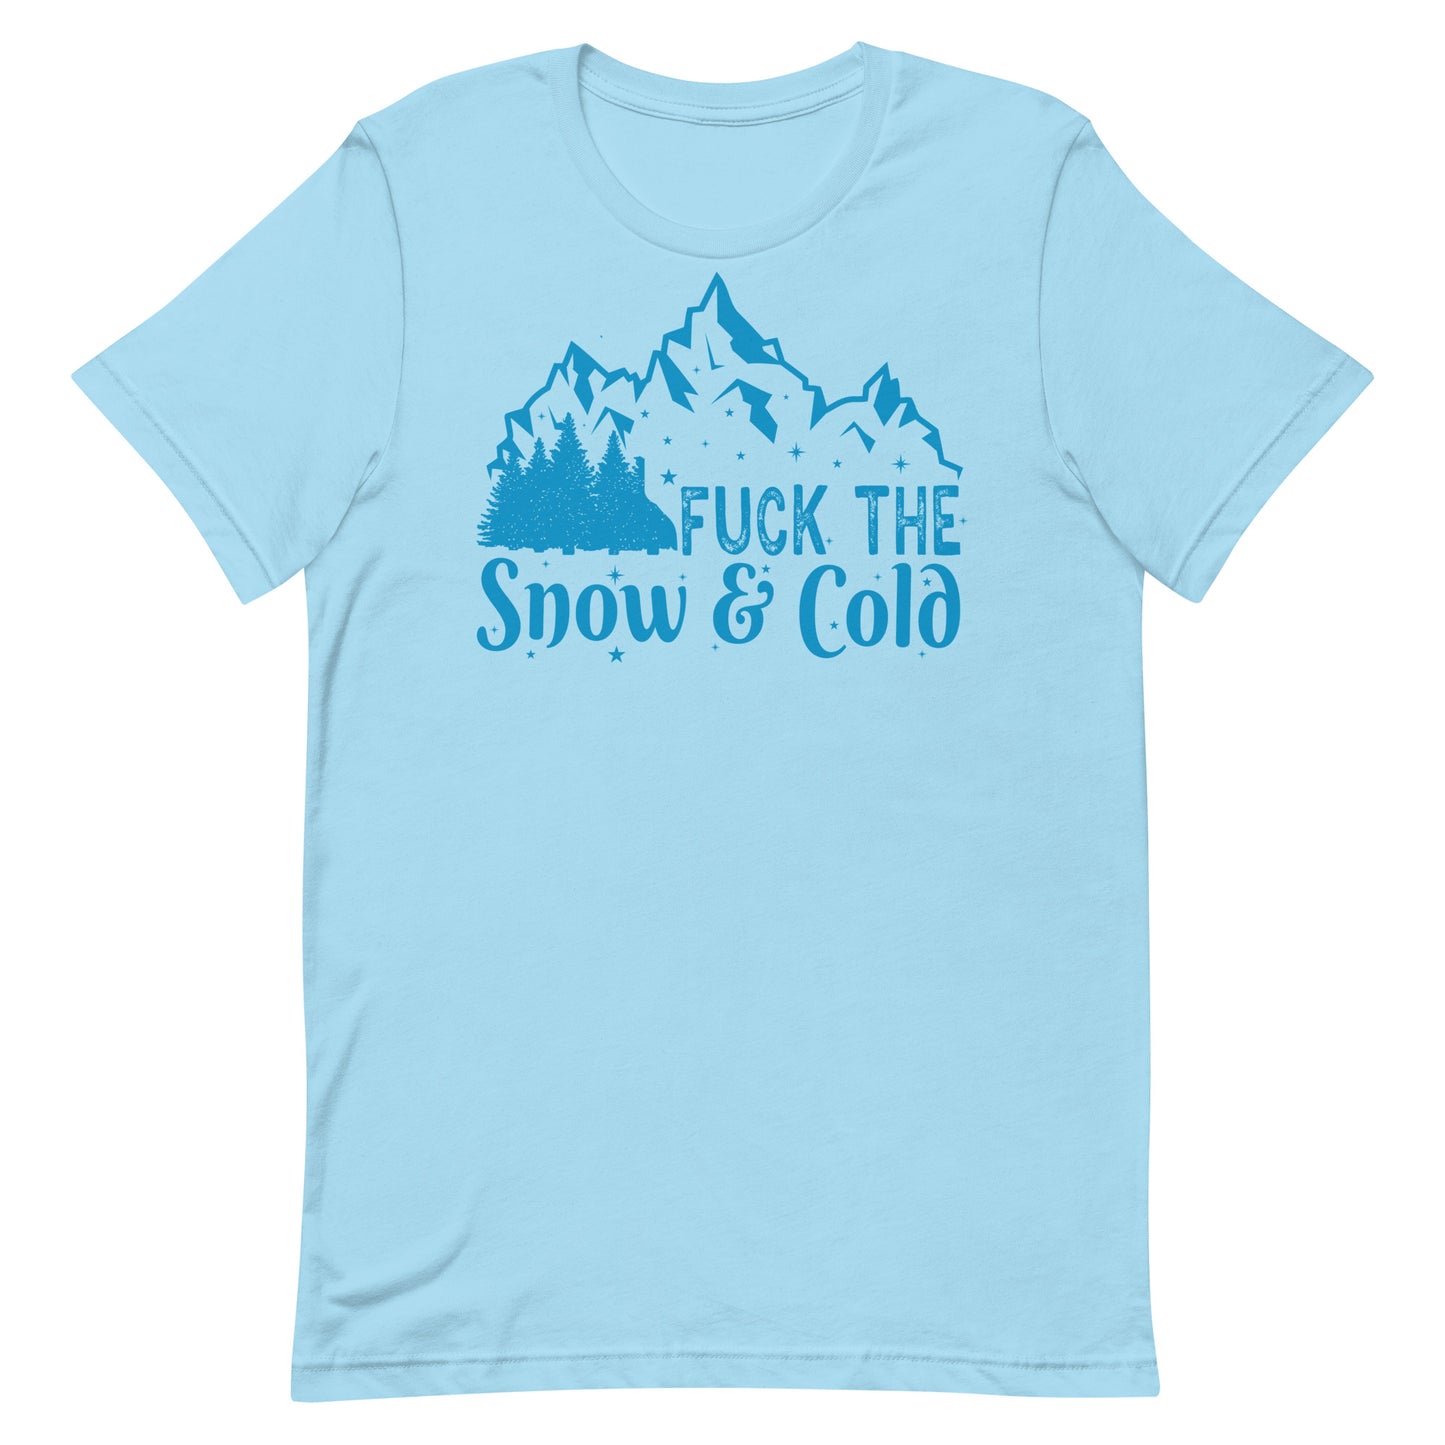 Fuck the Snow & Cold Unisex t-shirt